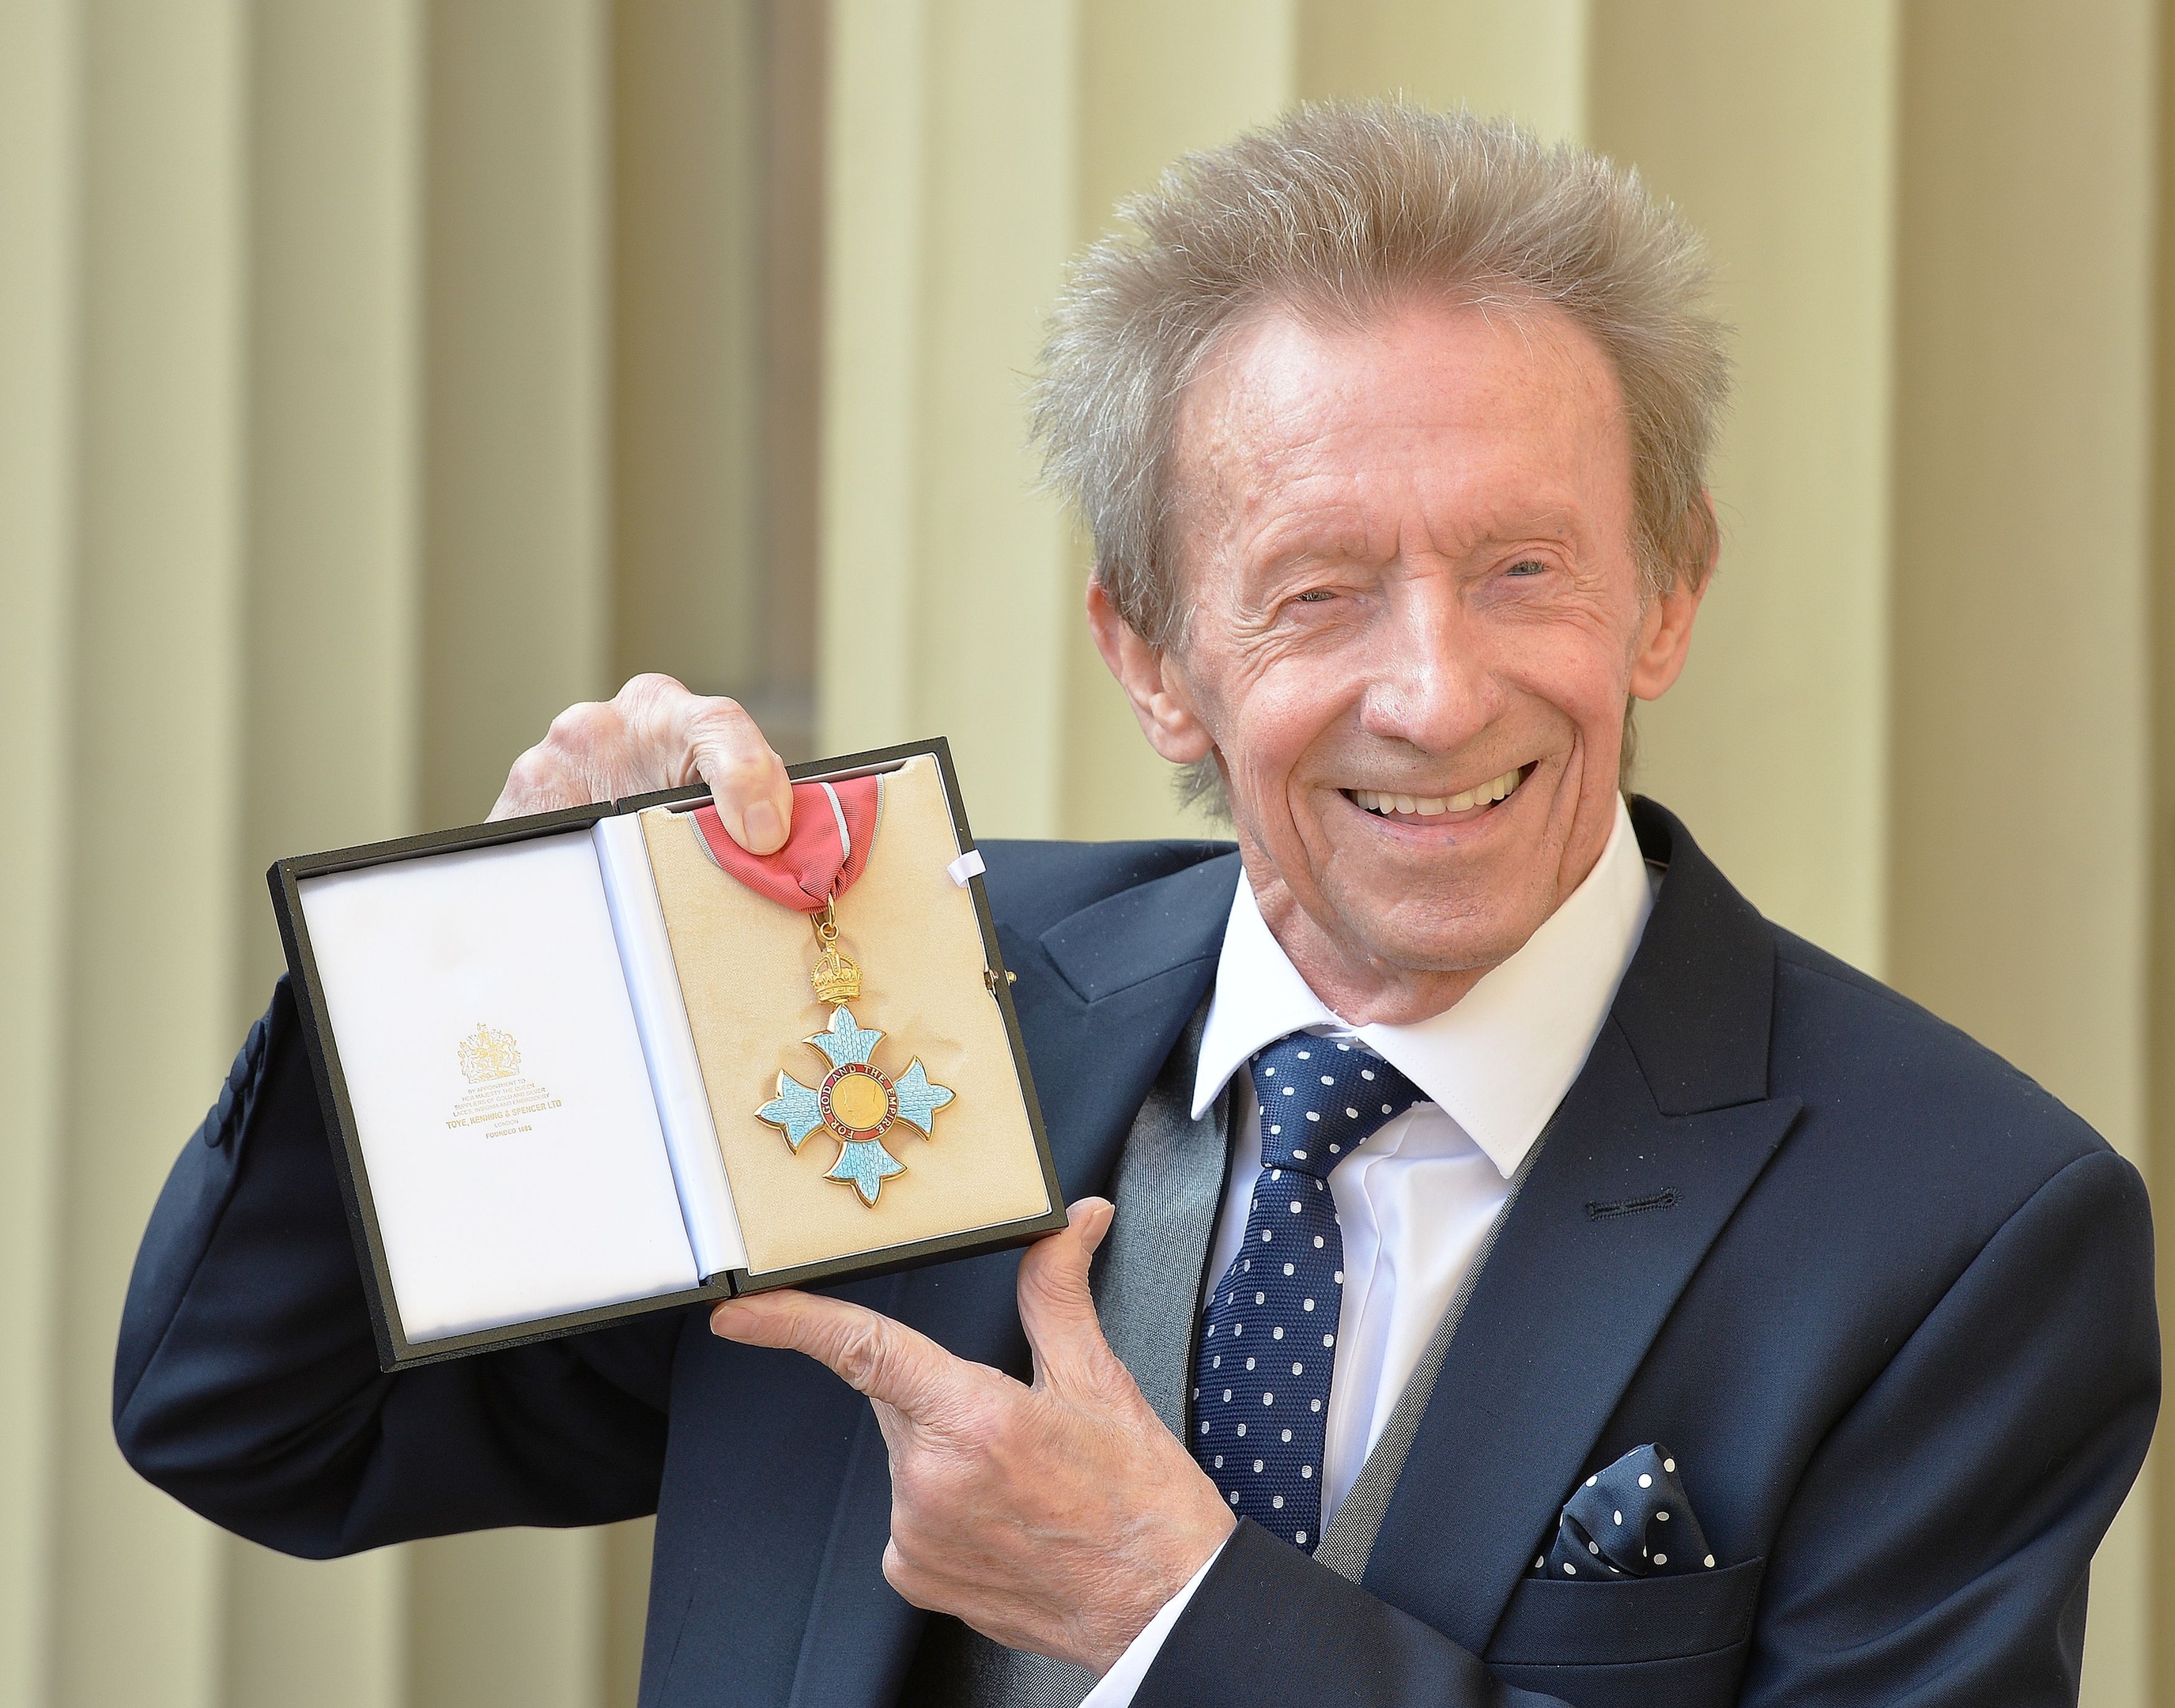 Denis Law talks football with prince as he's awarded CBE